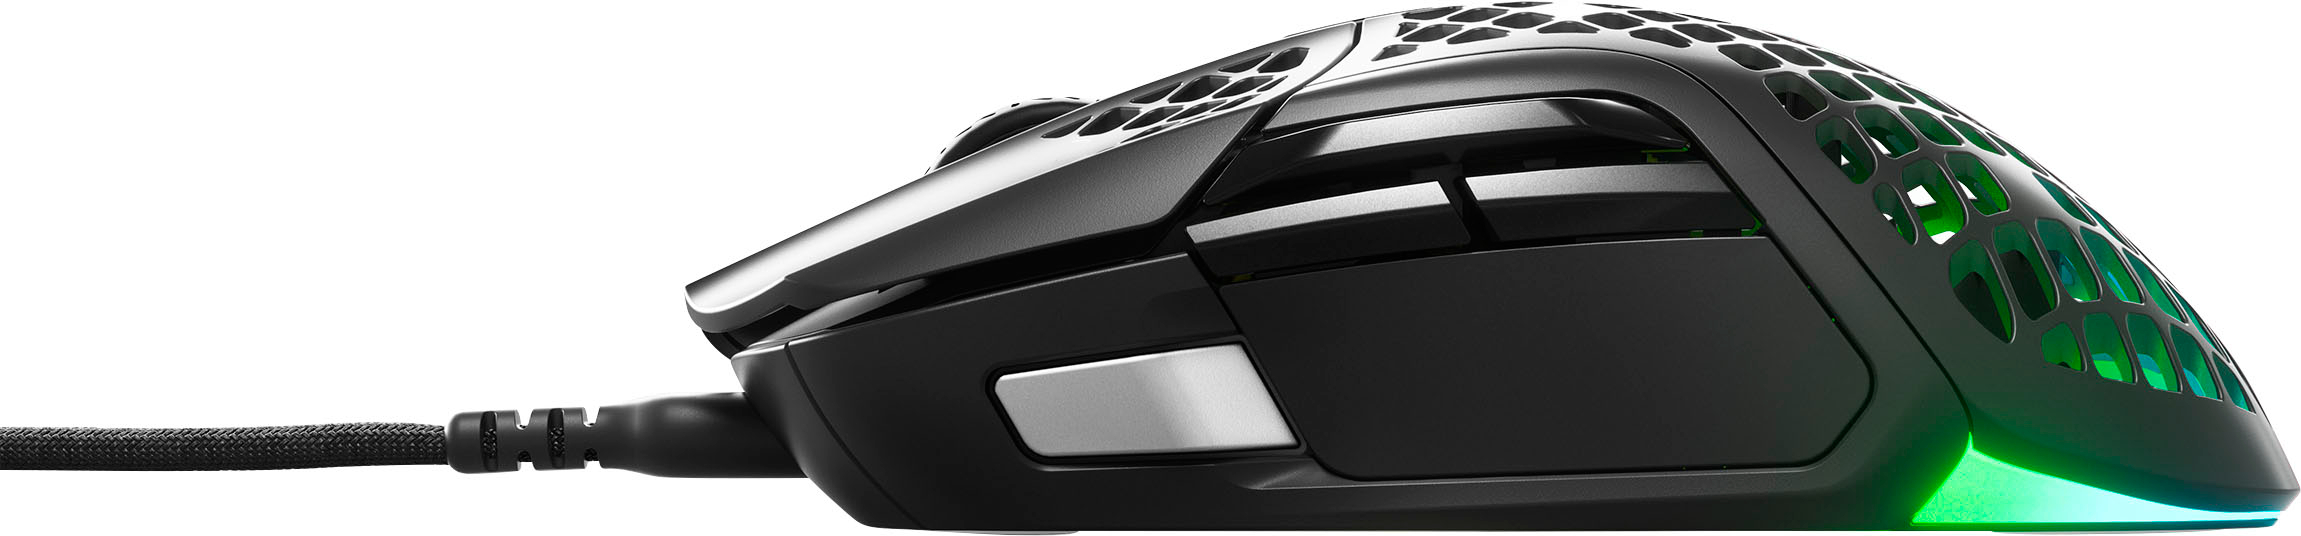  SteelSeries Aerox 5 - Lightweight Gaming Mouse - 18000 CPI -  TrueMove Air Optical Sensor - Ultra-lightweight Water Resistant Design -  Universal USB-C Connectivity,Black : Video Games